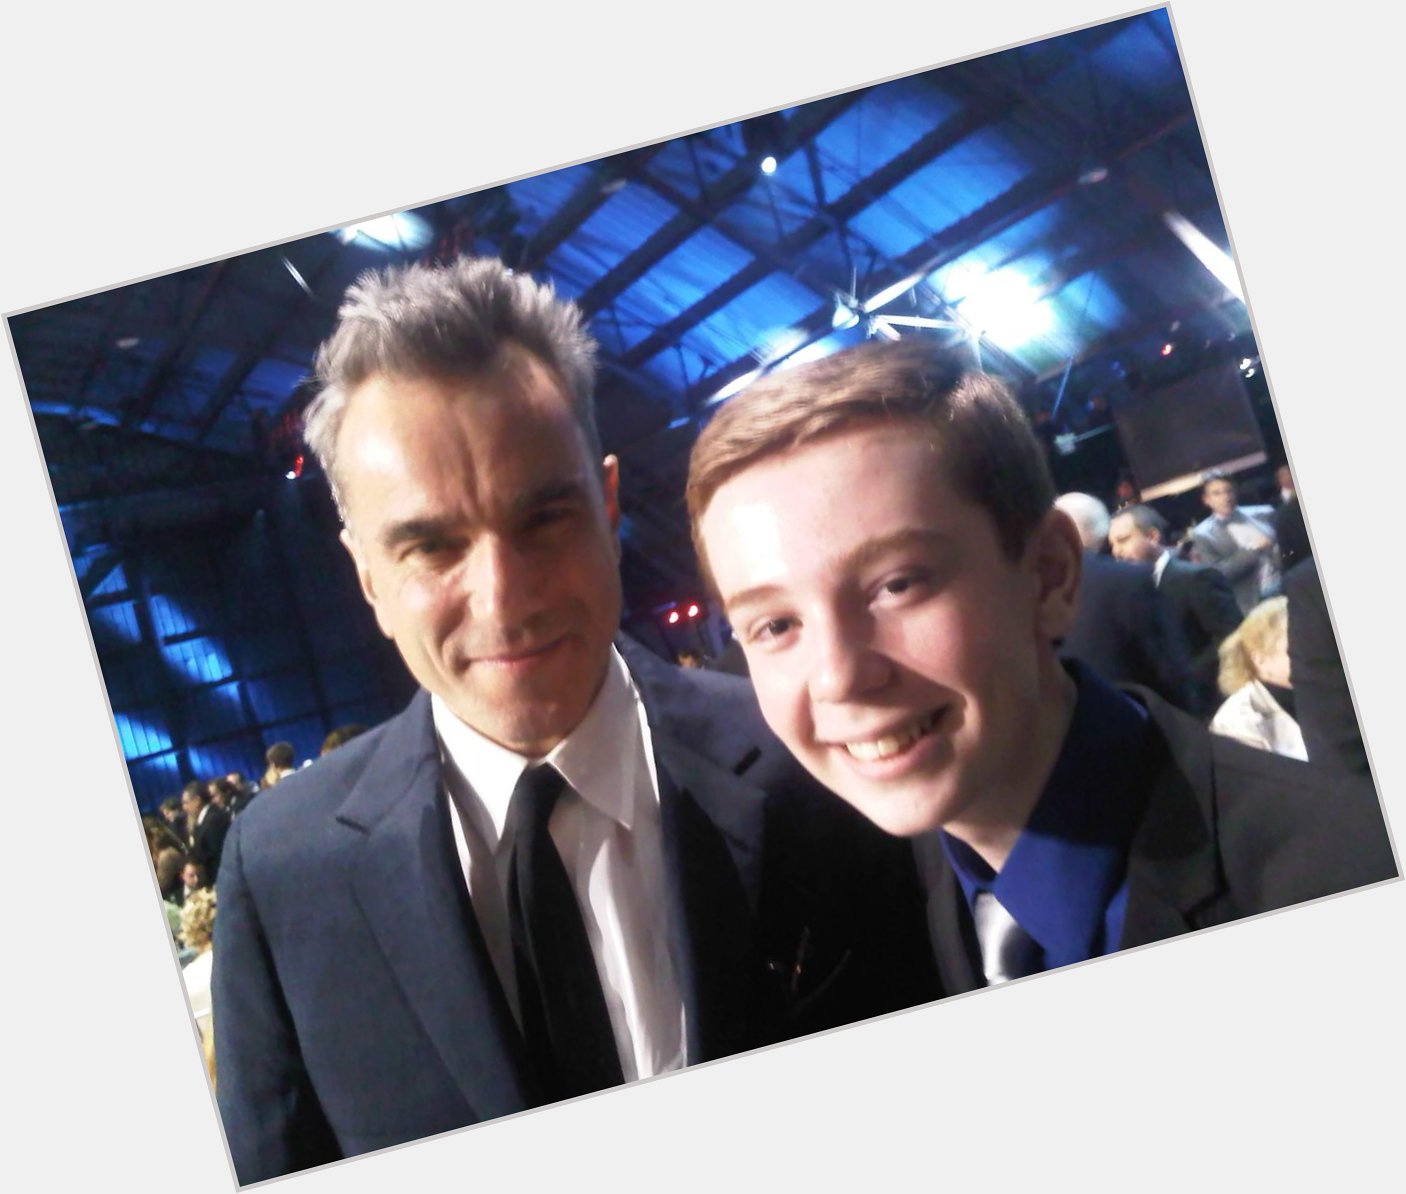 Happy 58th birthday to Mr. Daniel Day-Lewis, who has the firmest handshake of any celeb. I\ve ever met. 